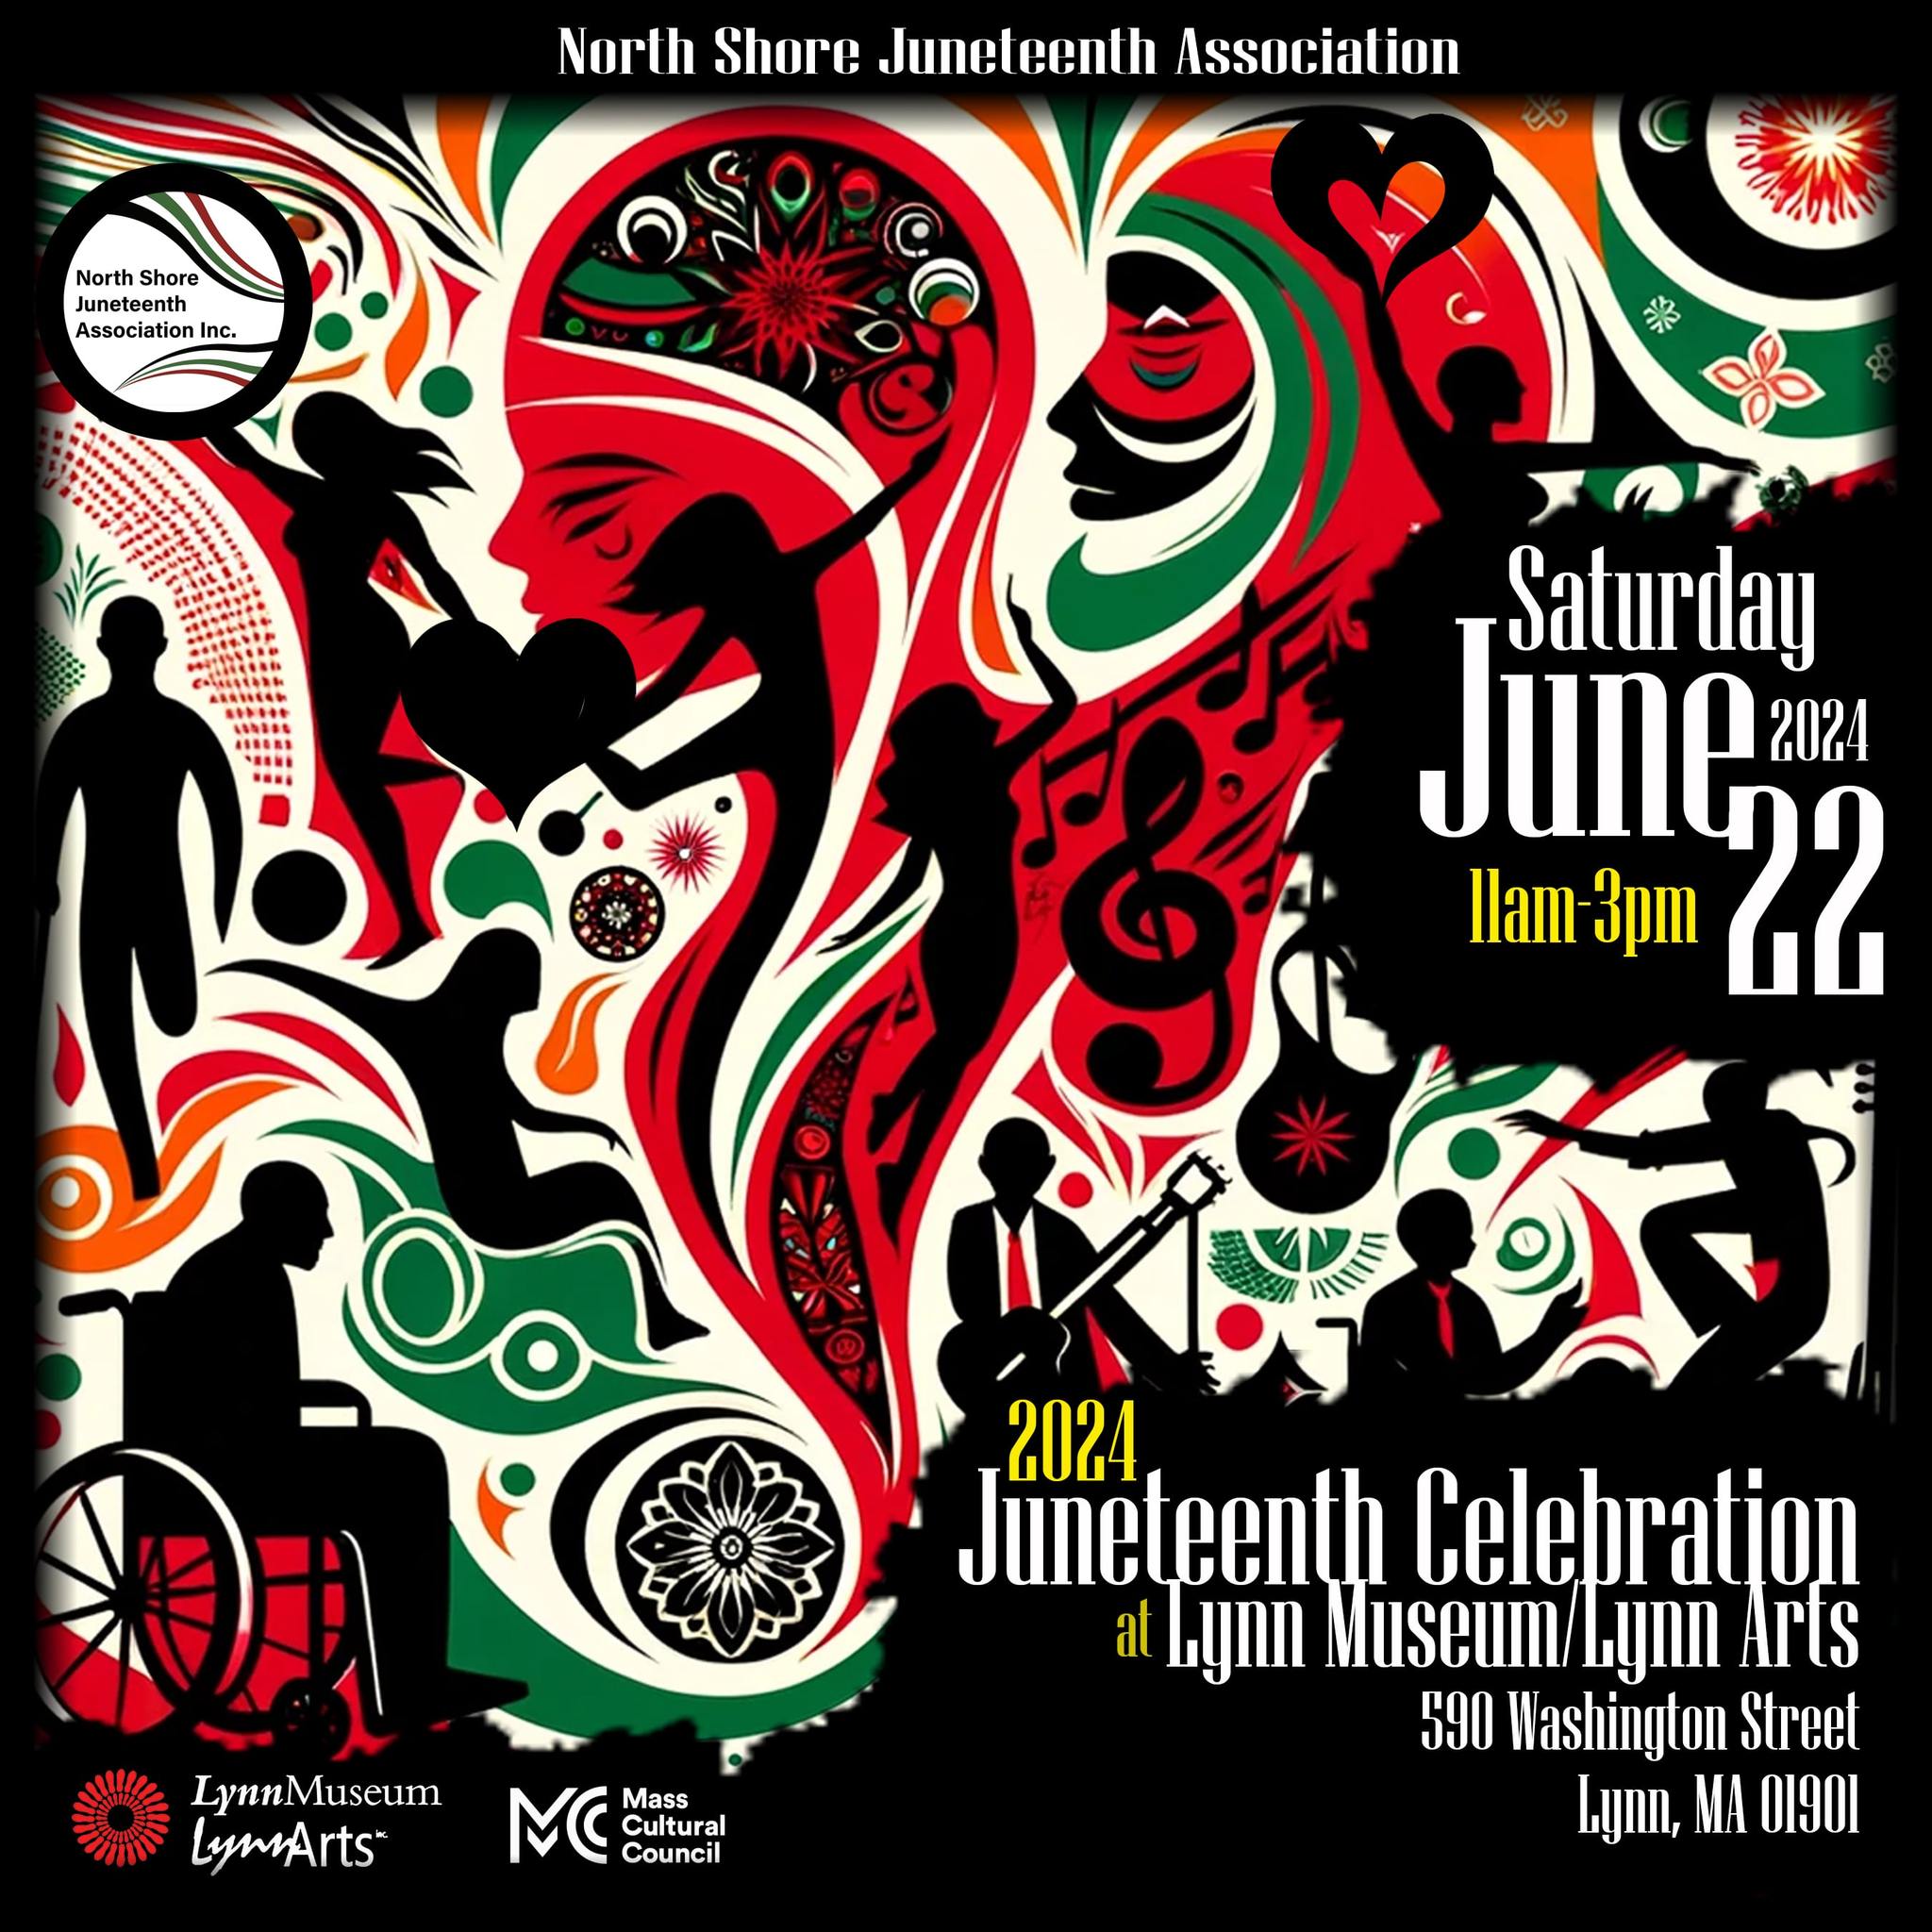 A vibrant poster for the North Shore Juneteenth Association's festival on June 22, 2024. It includes colorful and unique illustrations of musicians and dancers in holiday-inspired red and green hues.